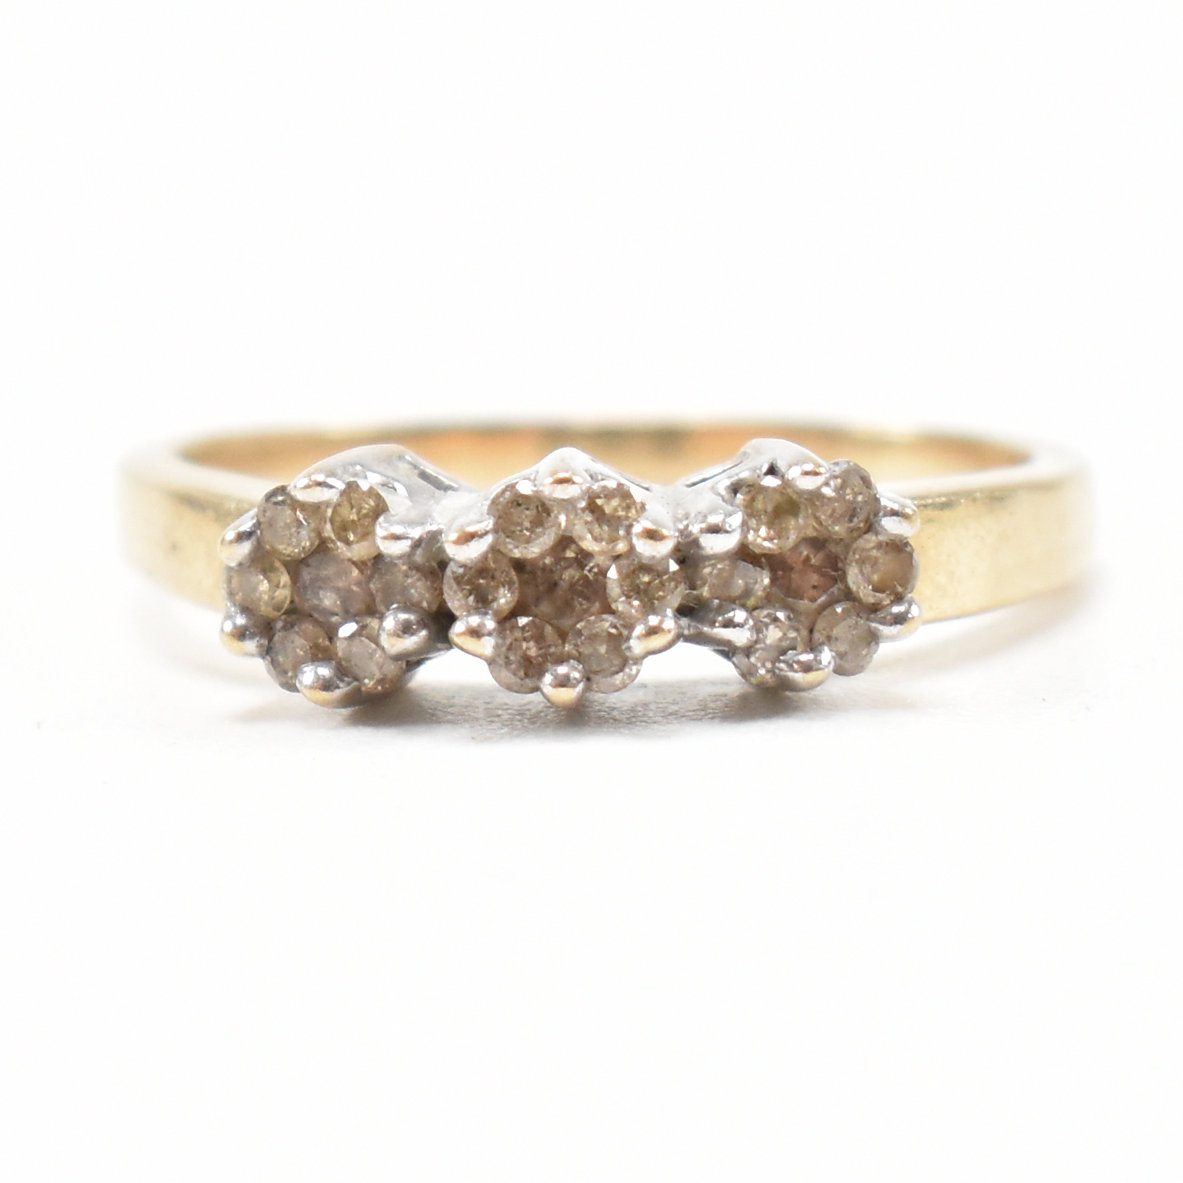 HALLMARKED 9CT GOLD & DIAMOND CLUSTER RING - Image 2 of 8